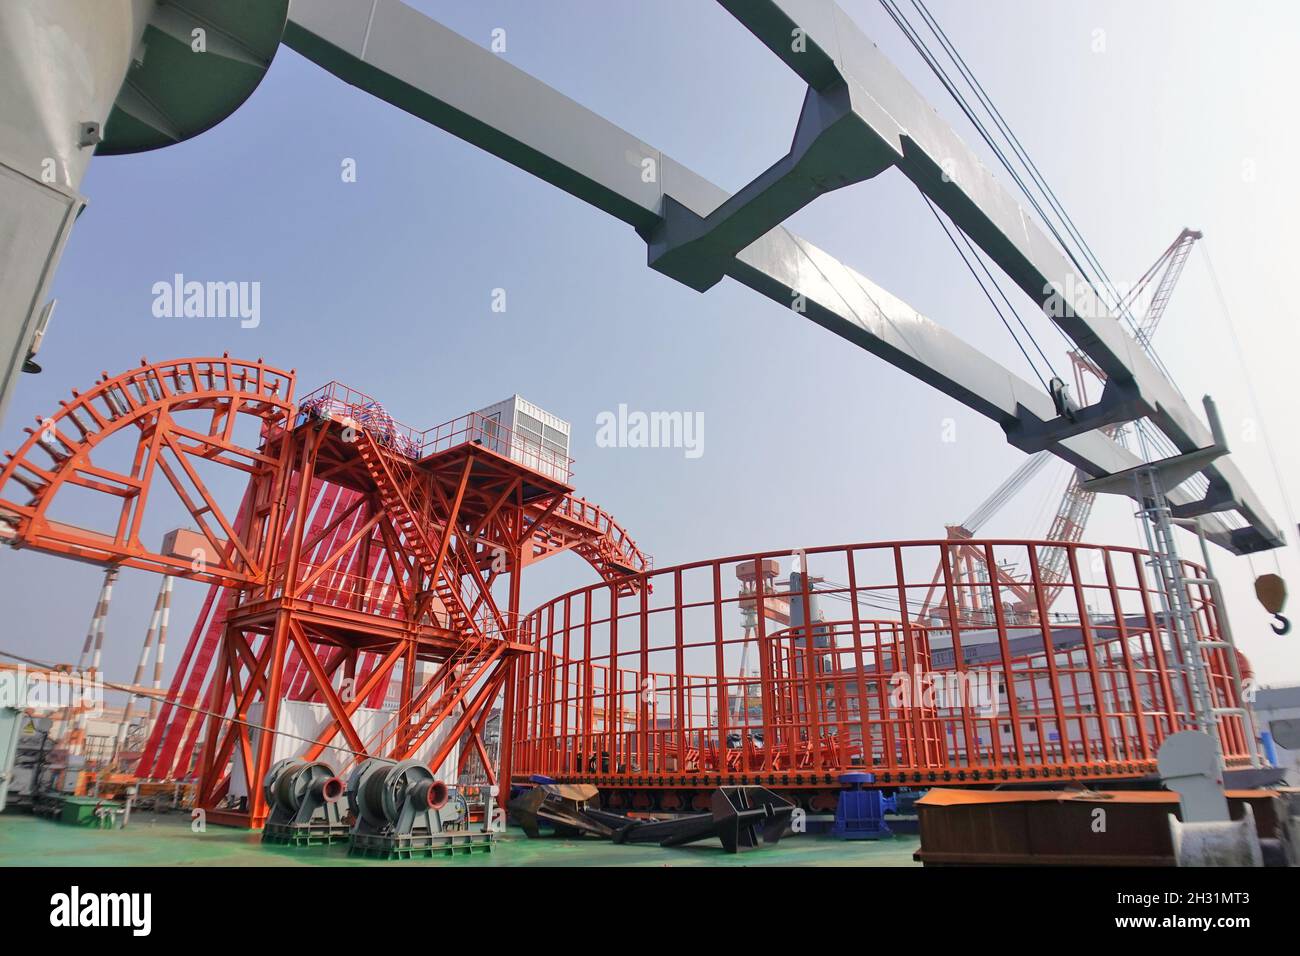 YANTAI, CHINA - OCTOBER 25, 2021 - Aerial photo taken on Oct. 25, 2021  shows cable laying equipment on runneng 168 Cable laying ship at the  construction base in Yantai, Shandong Province,